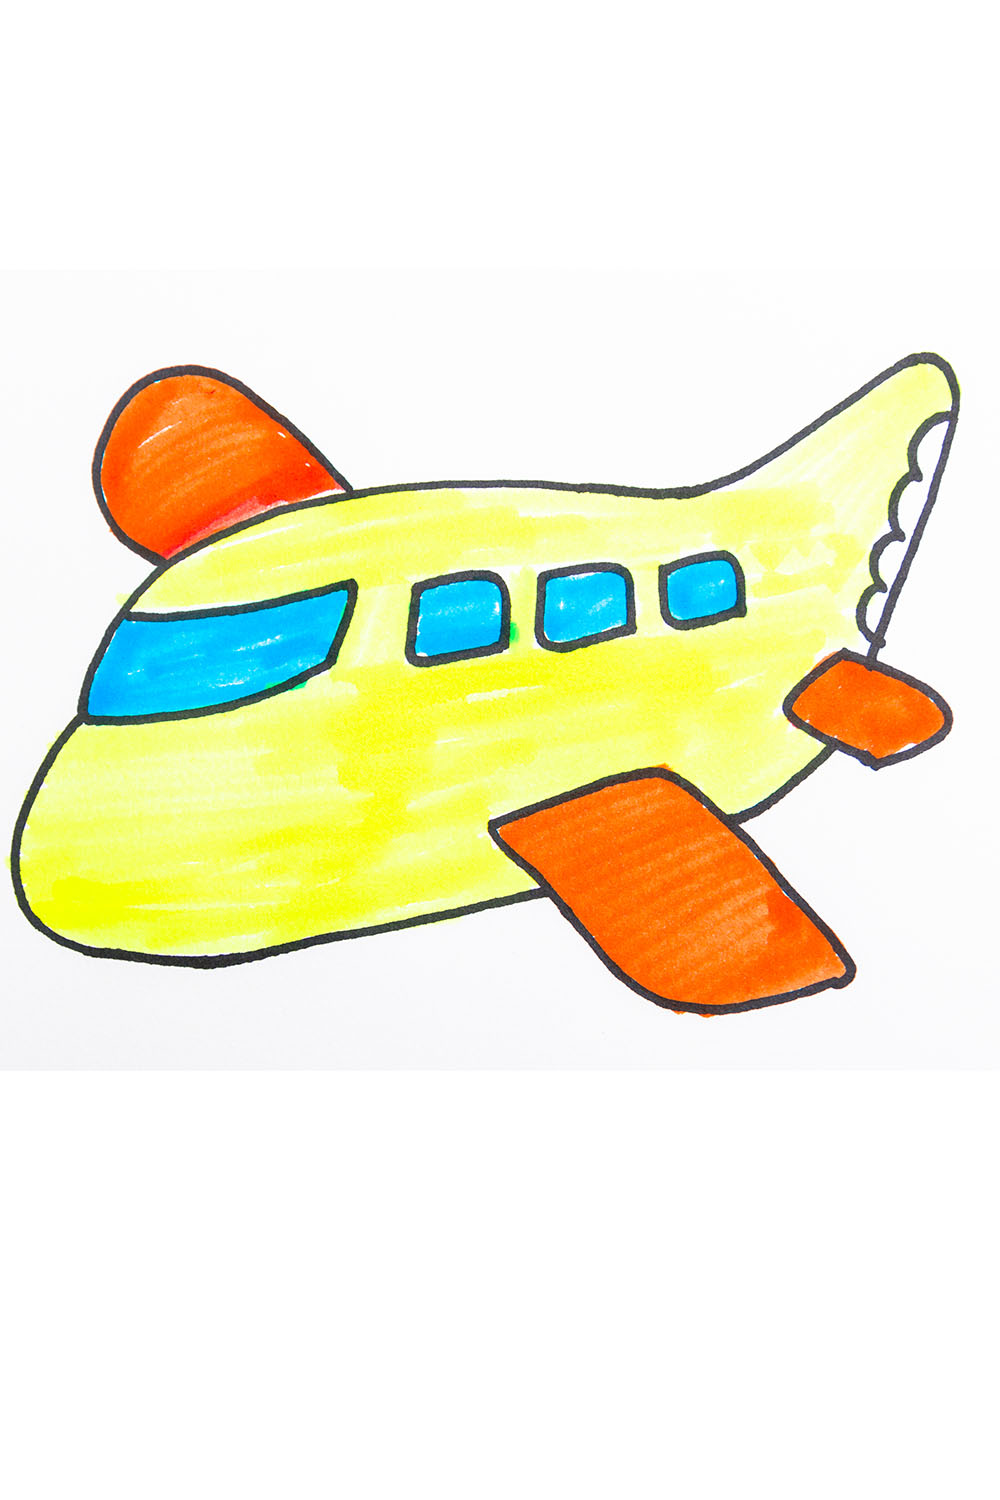 How to draw a plane for kids